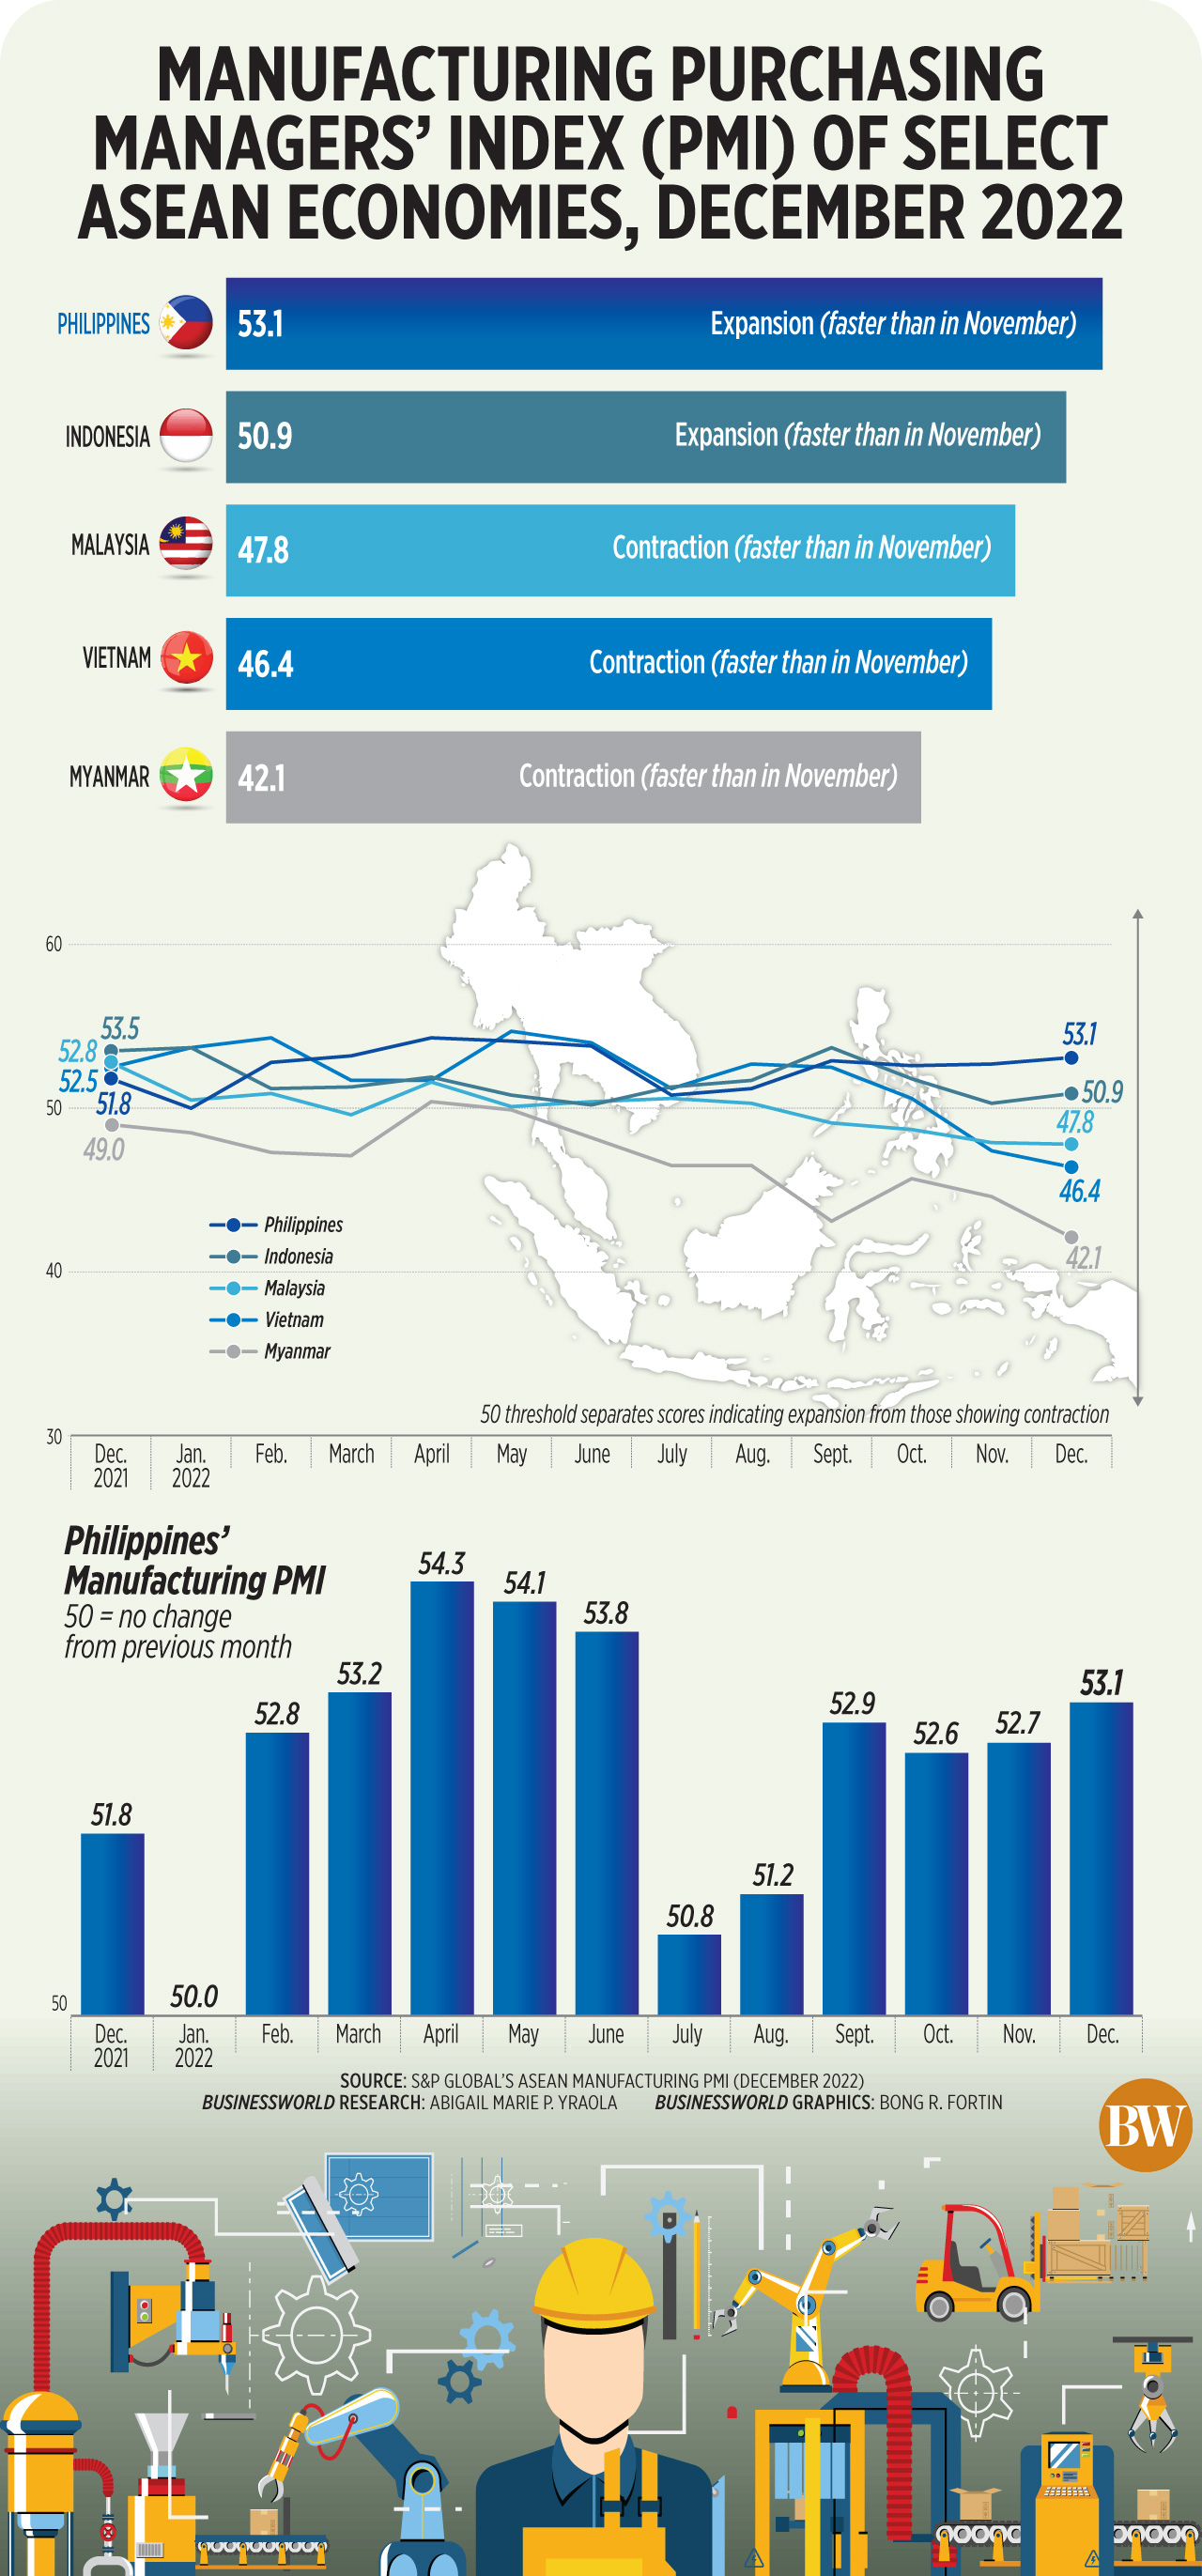 Manufacturing Purchasing Managers’ Index of select ASEAN economies, December 2022